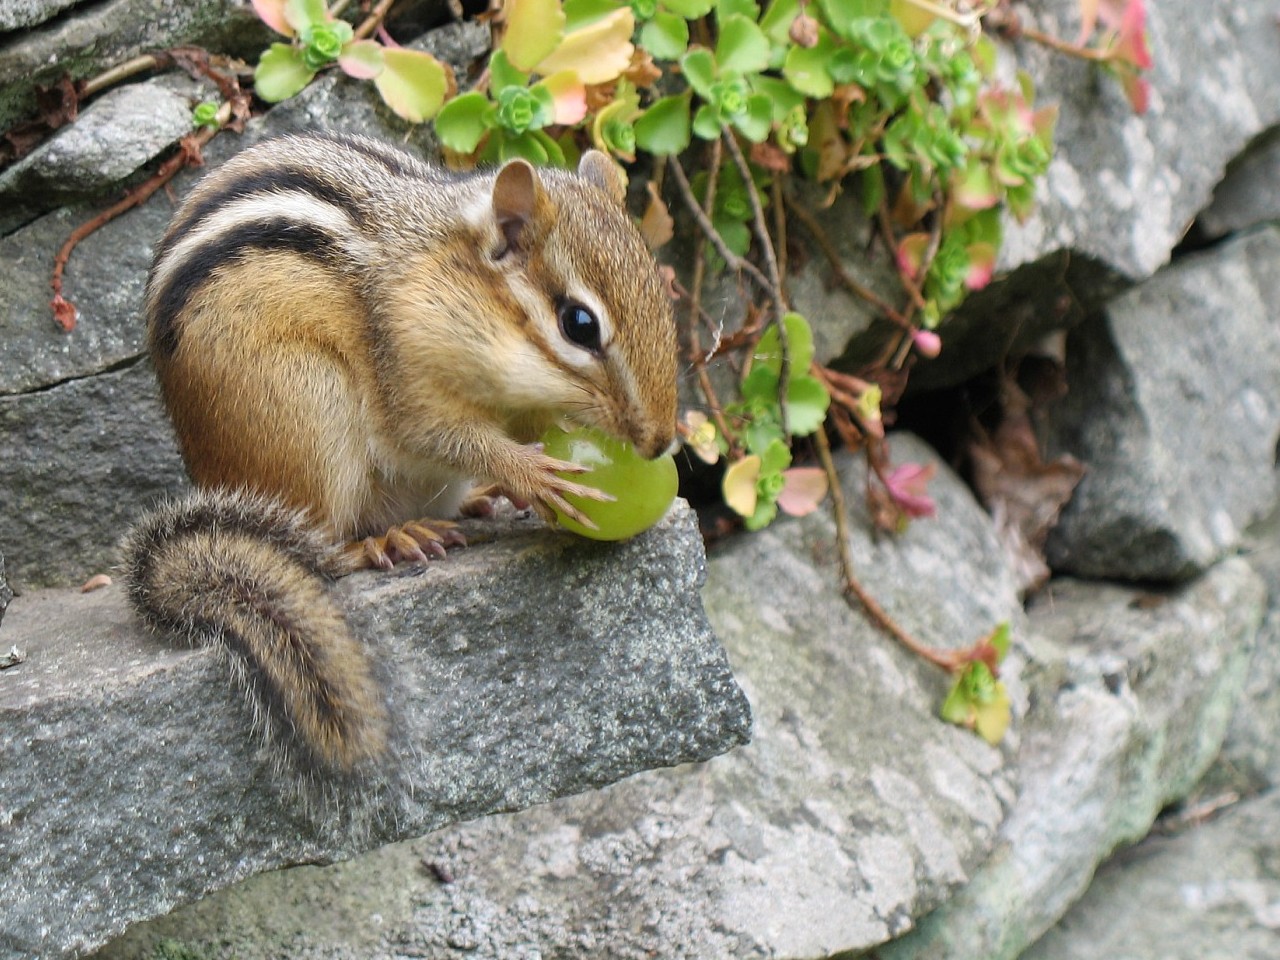 a chipmun is sitting on a rock and eating an apple